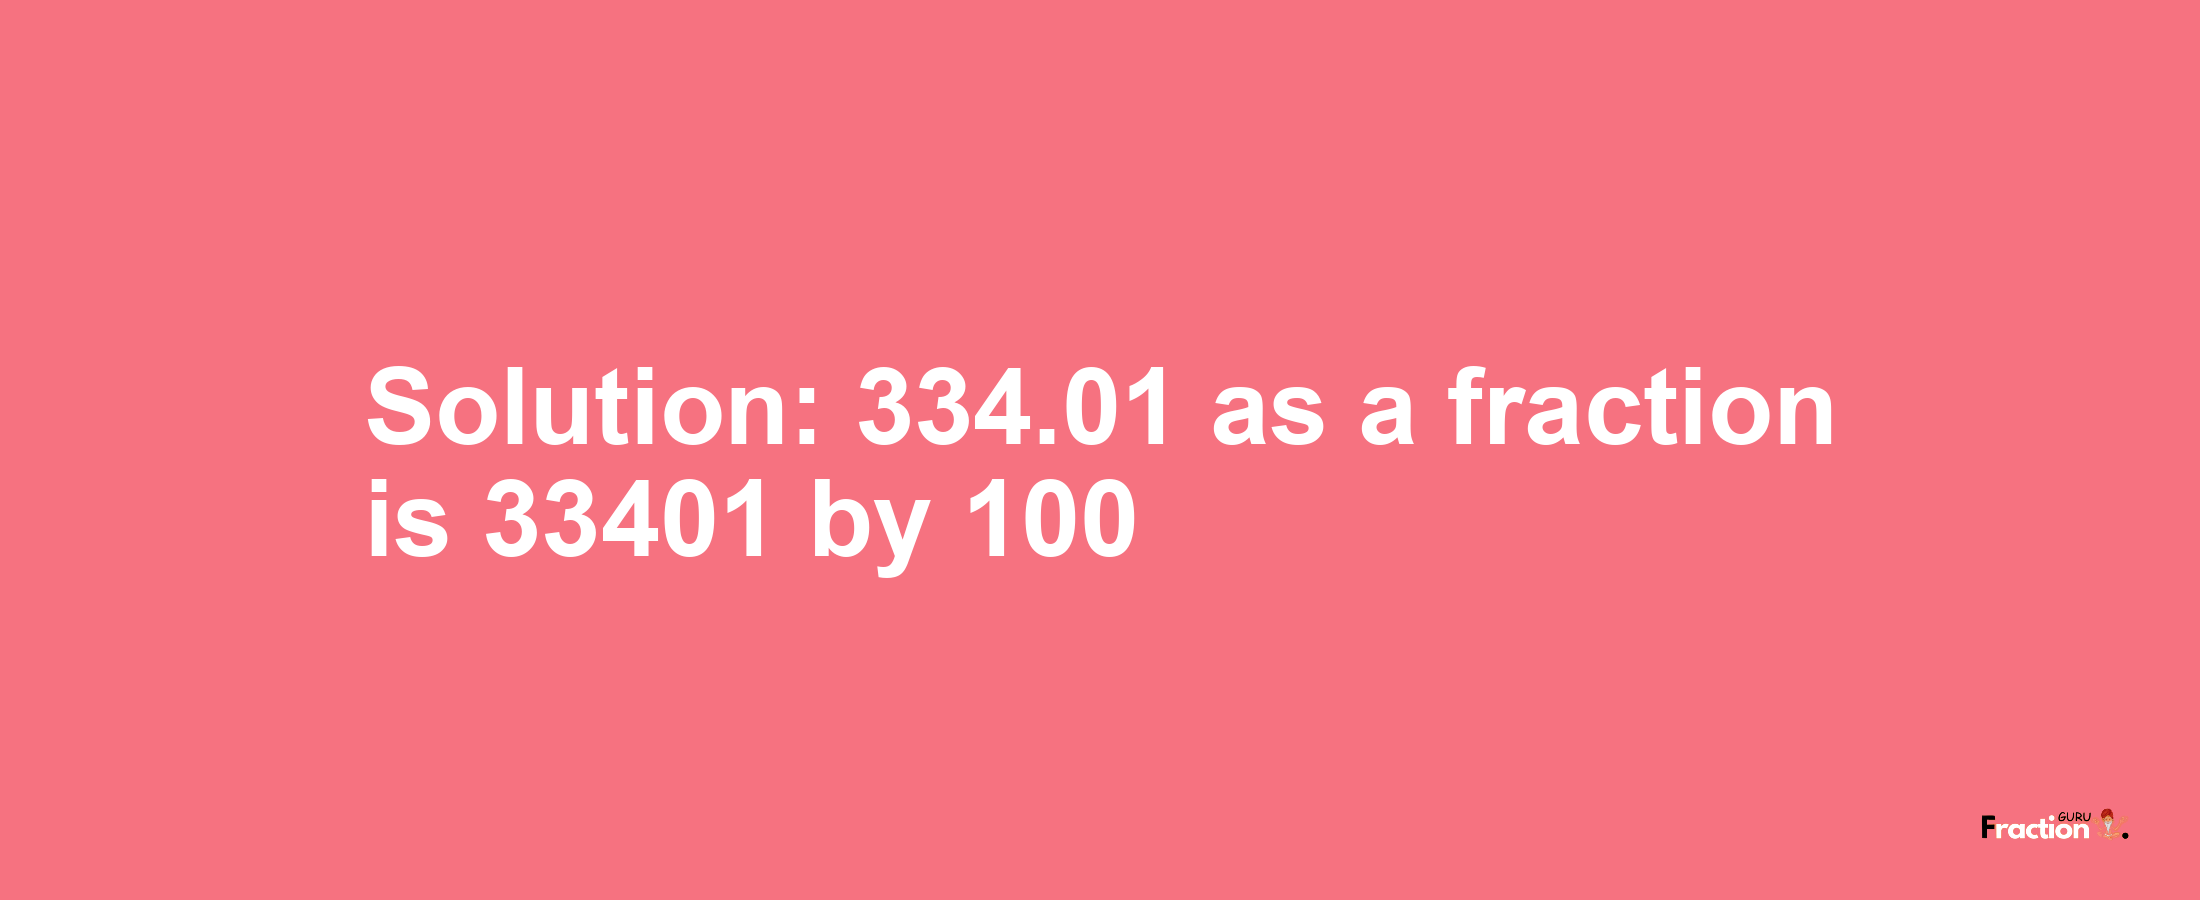 Solution:334.01 as a fraction is 33401/100